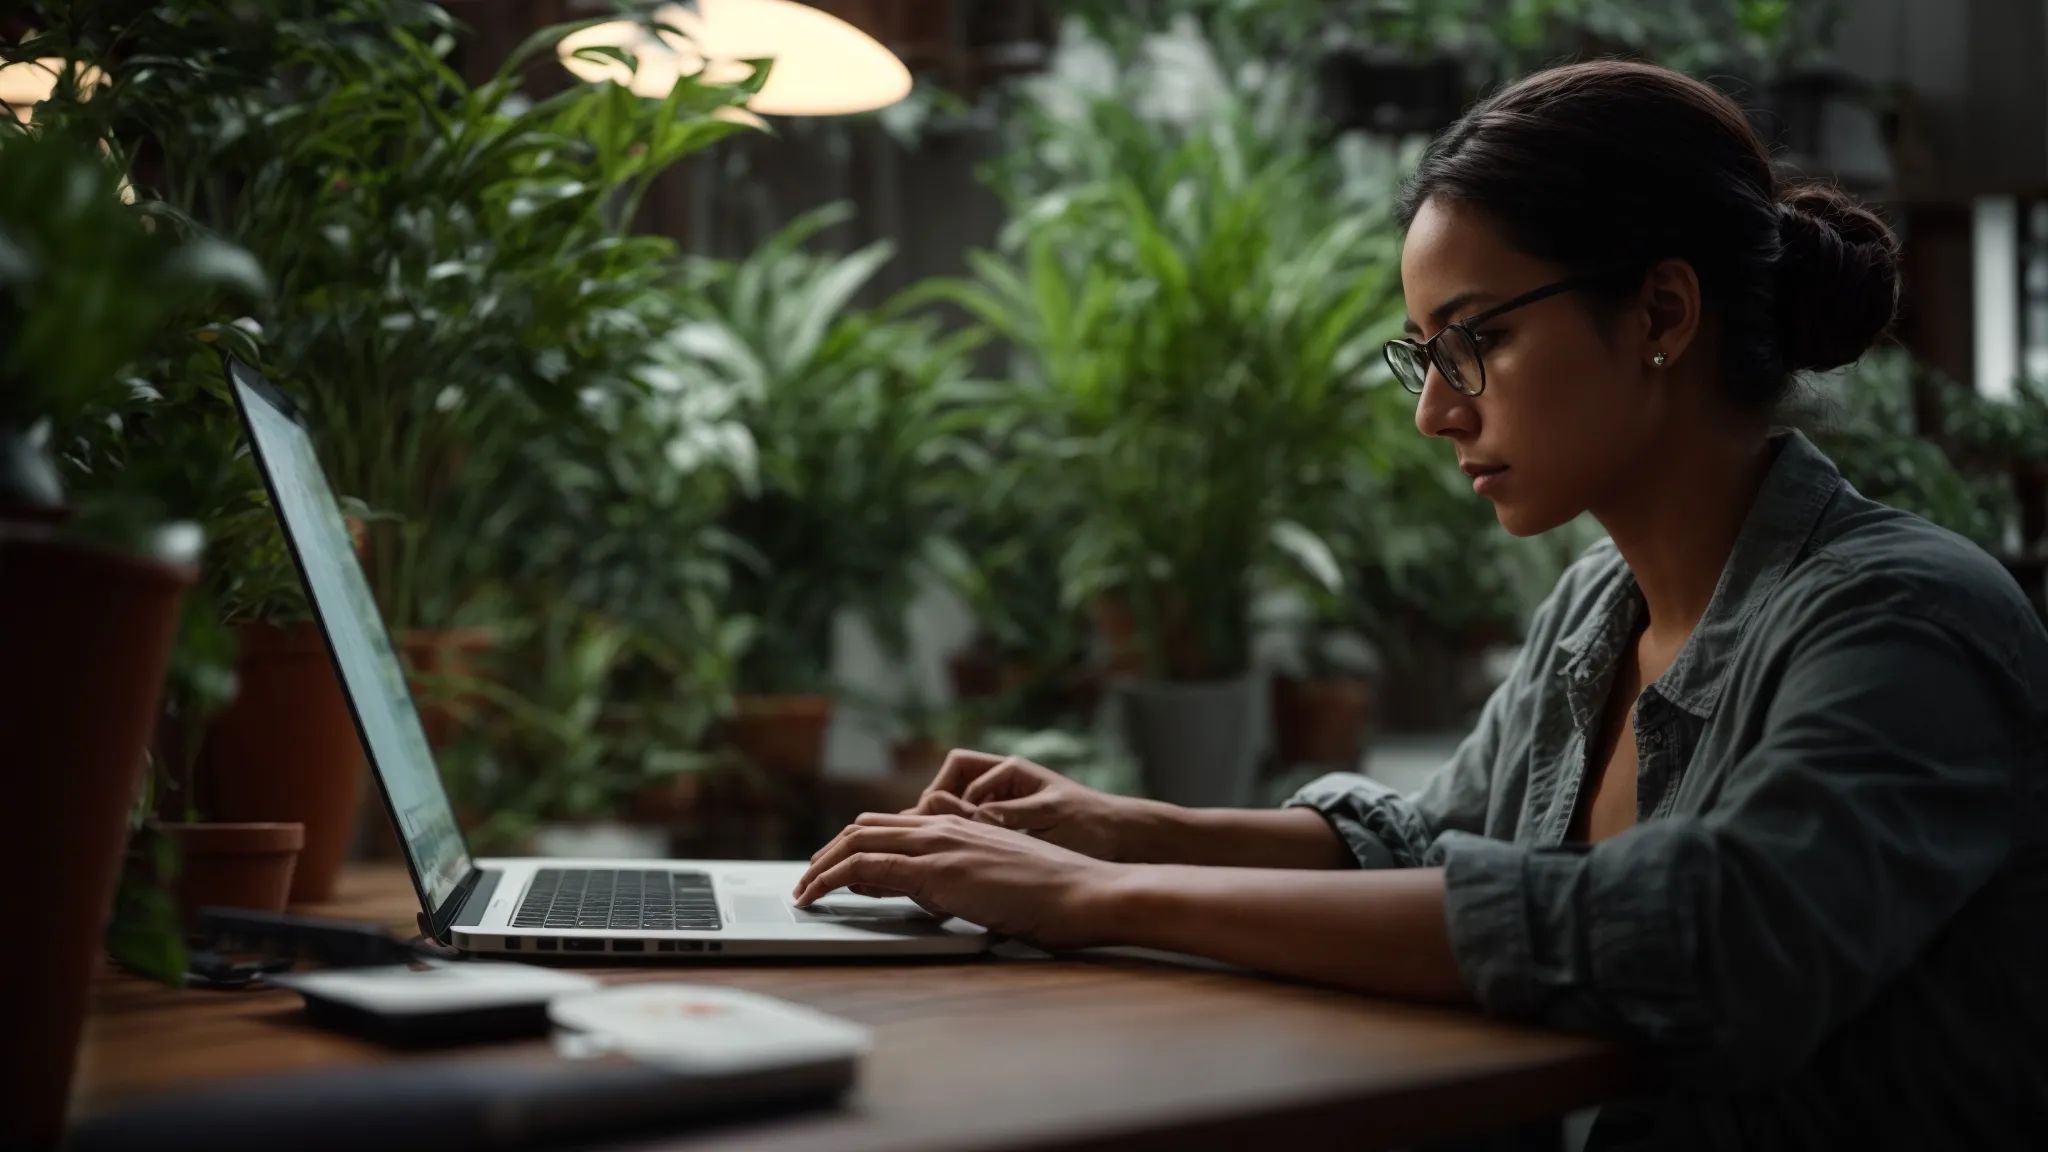 a person thoughtfully types on a laptop at a desk surrounded by plants, reflecting content creation in a serene environment.